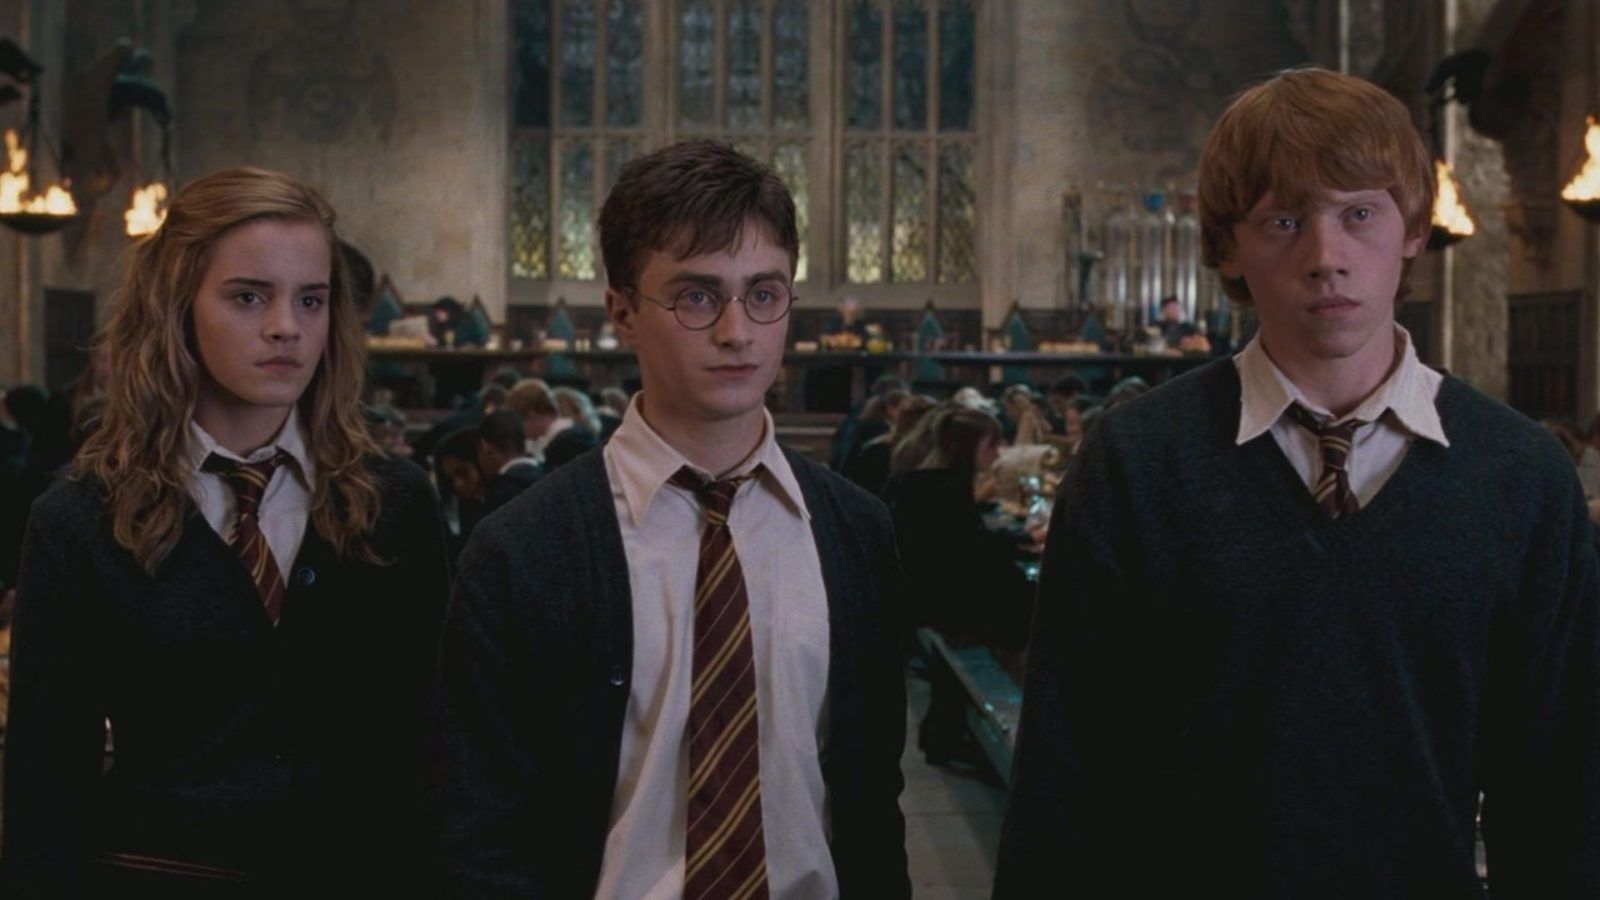 8 times ‘Harry Potter’ movies ignored their own rules